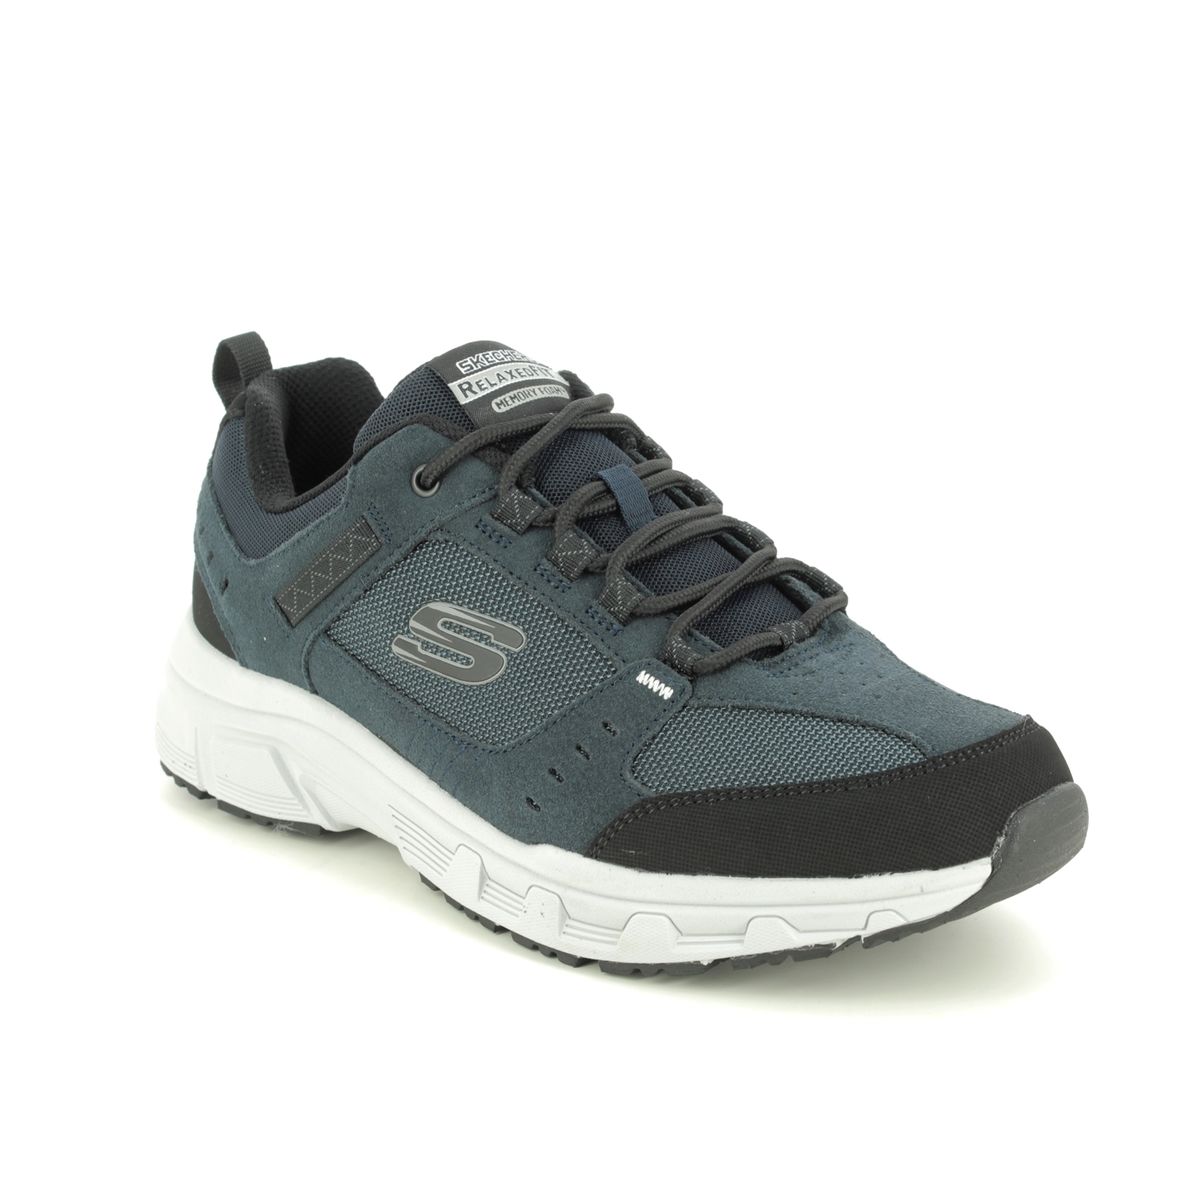 Skechers Oak Canyon Relaxed Fit 51893 NVBK Navy trainers